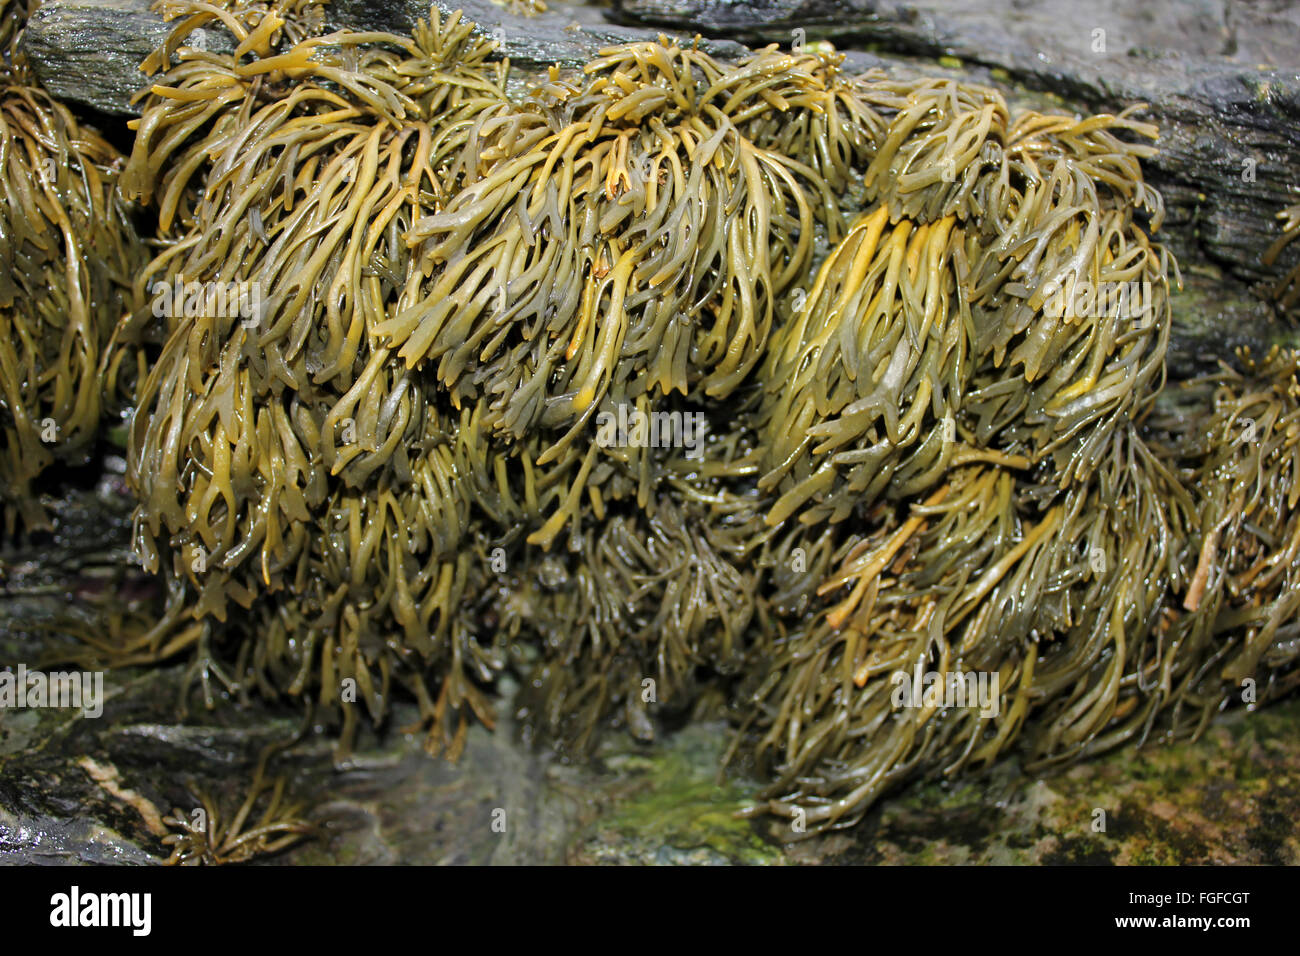 Channelled Wrack Pelvetia canaliculata Growing On The Edge Of A Rockpool, upper littoral zone Stock Photo